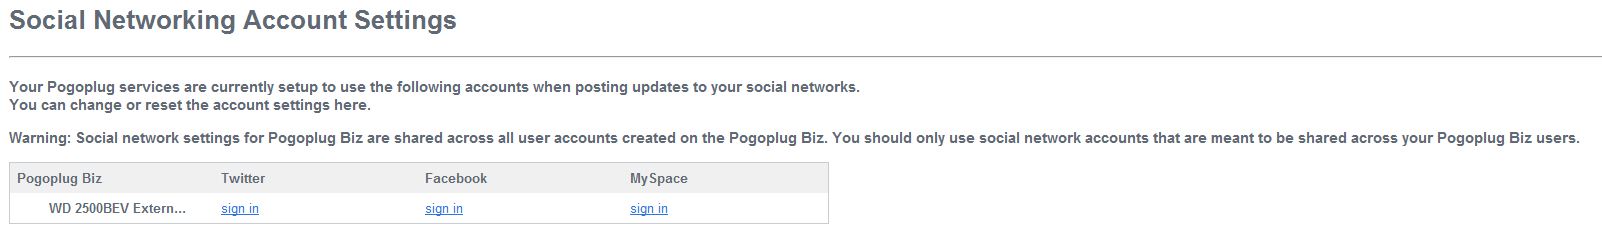 Social networking is shared across all accounts for Pogoplug Biz users. 